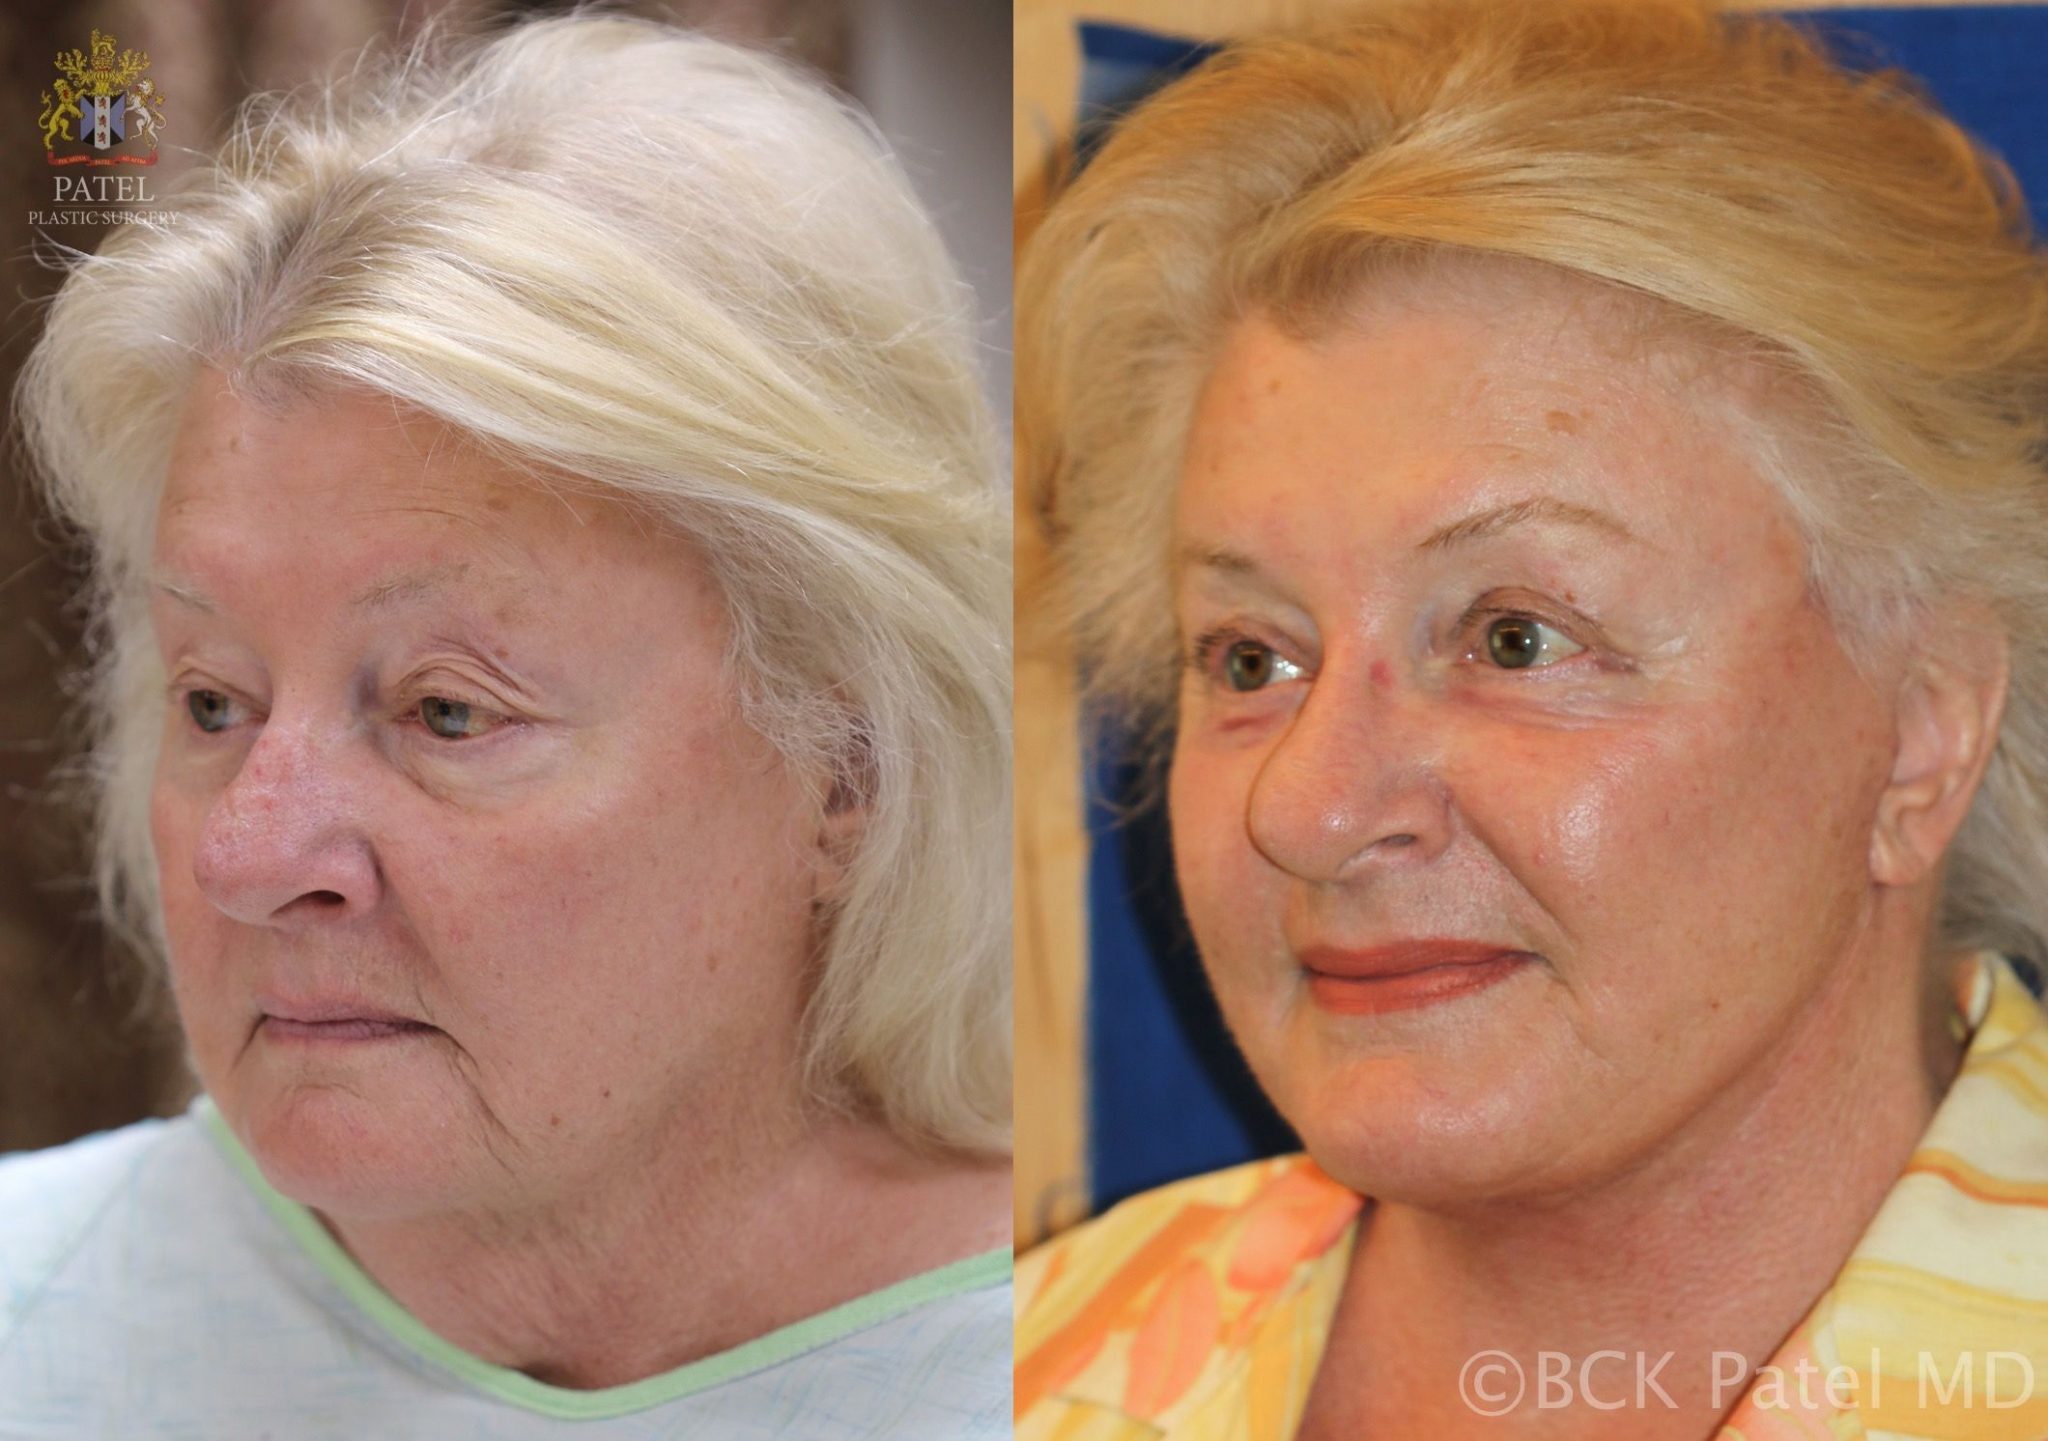 englishsurgeon.com. Photos show results of a facelift and necklift in a female with a tight jawline and neck. BCK Patel MD, FRCS; Salt Lake City, Utah